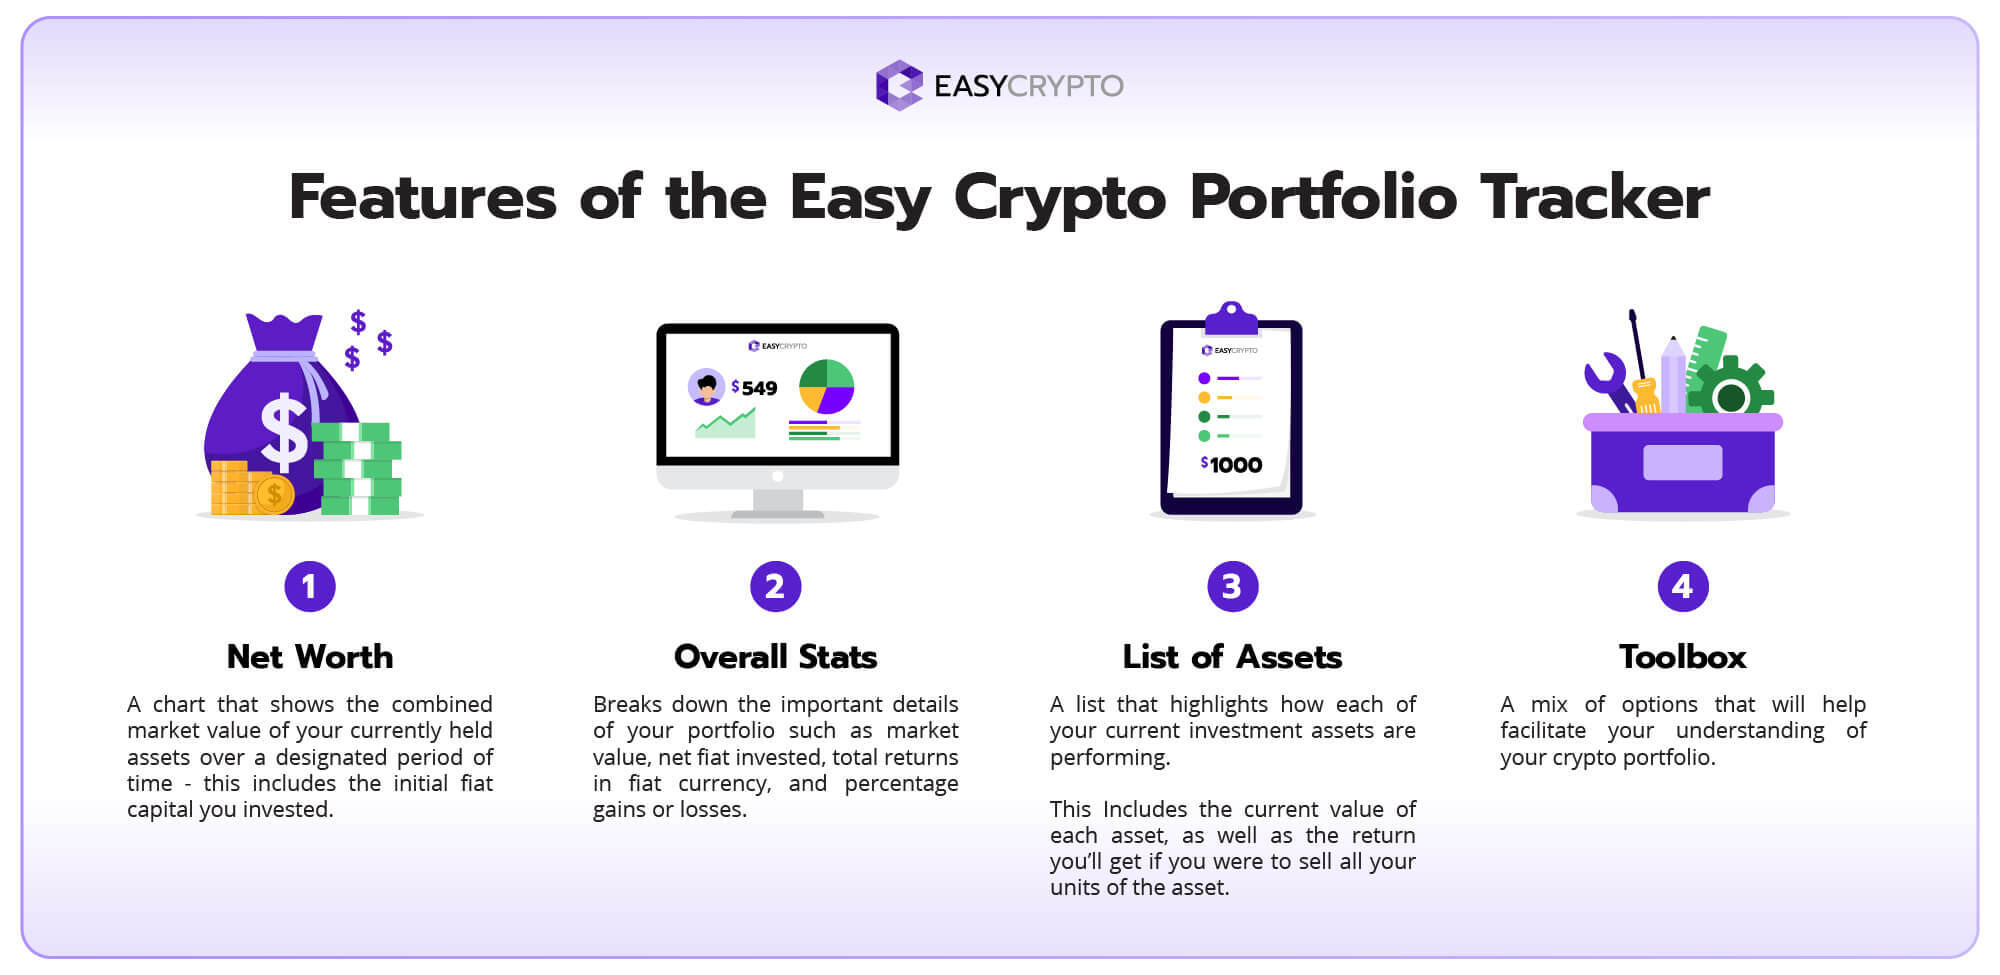 Infographic content showcasing the features included in the Easy Crypto portfolio tracker.